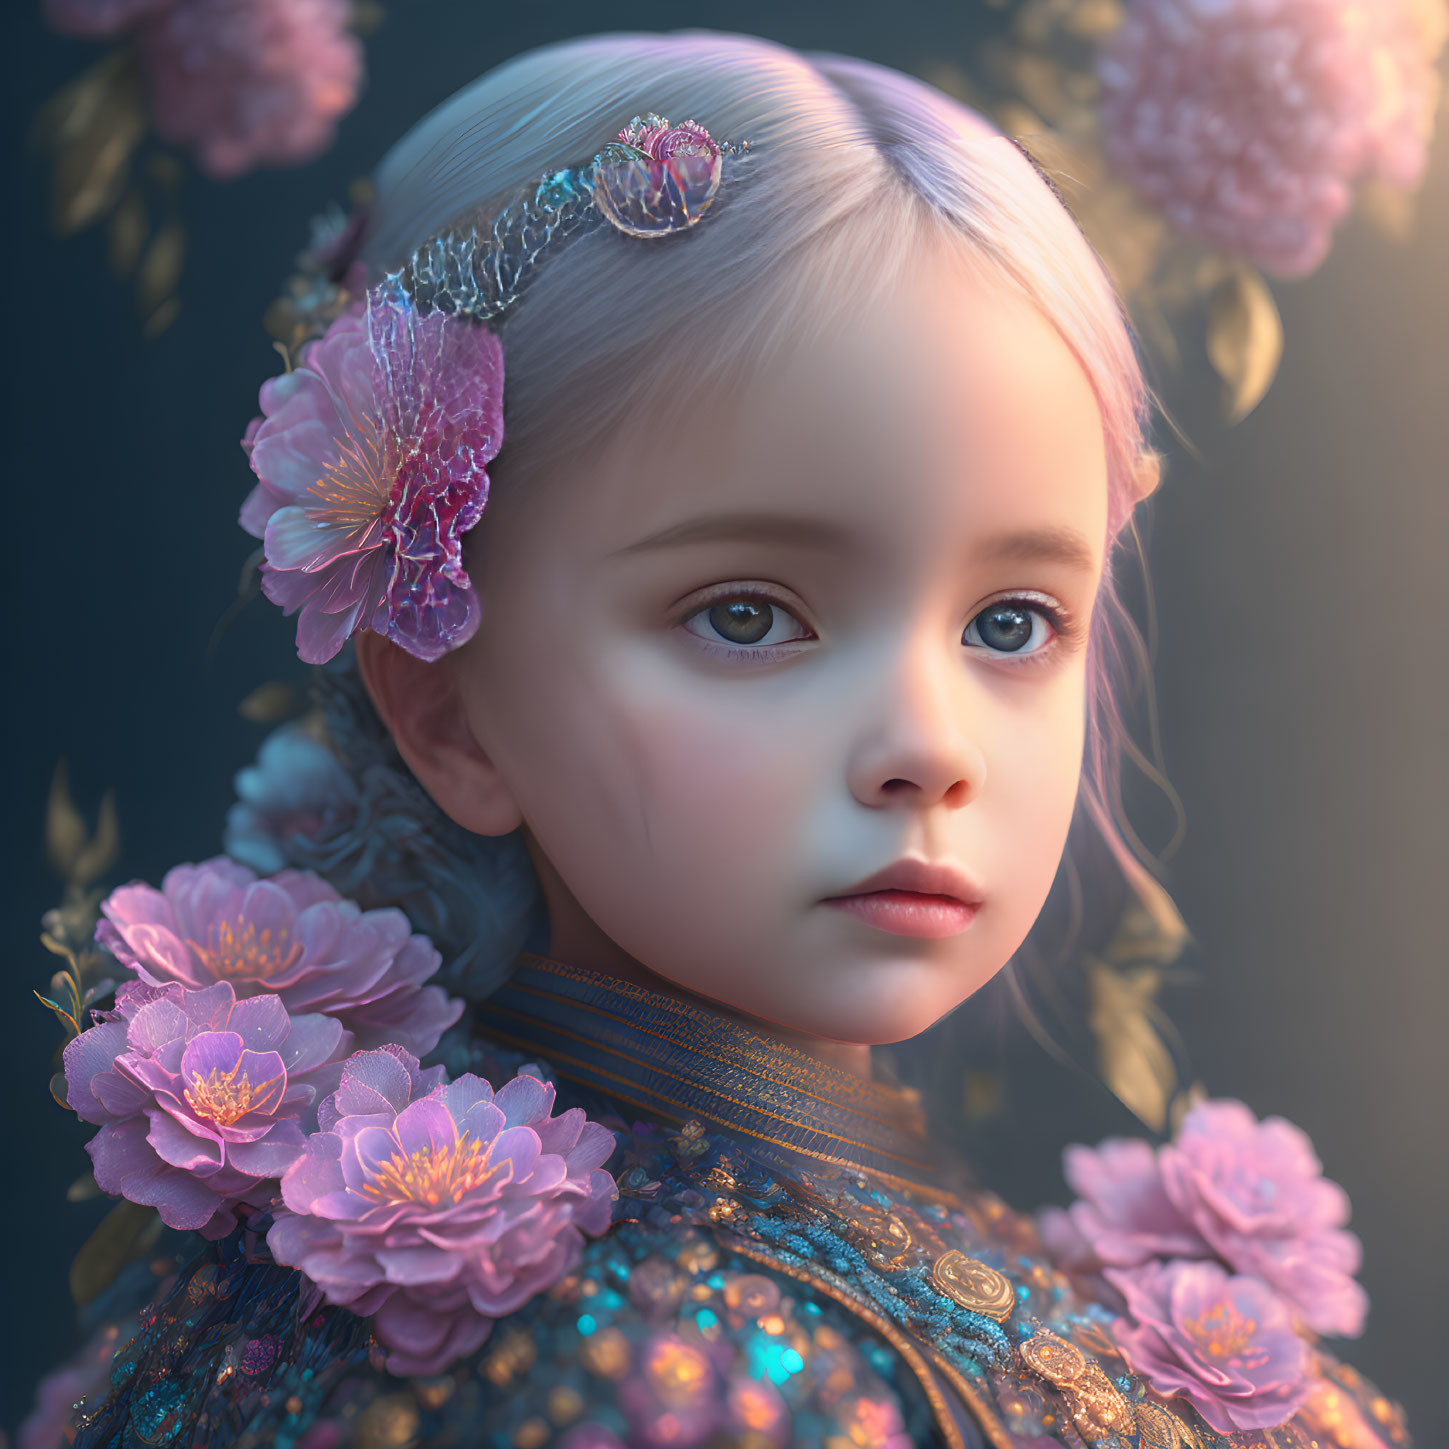 Vibrant pink flowers and jewelry on young girl in digital artwork